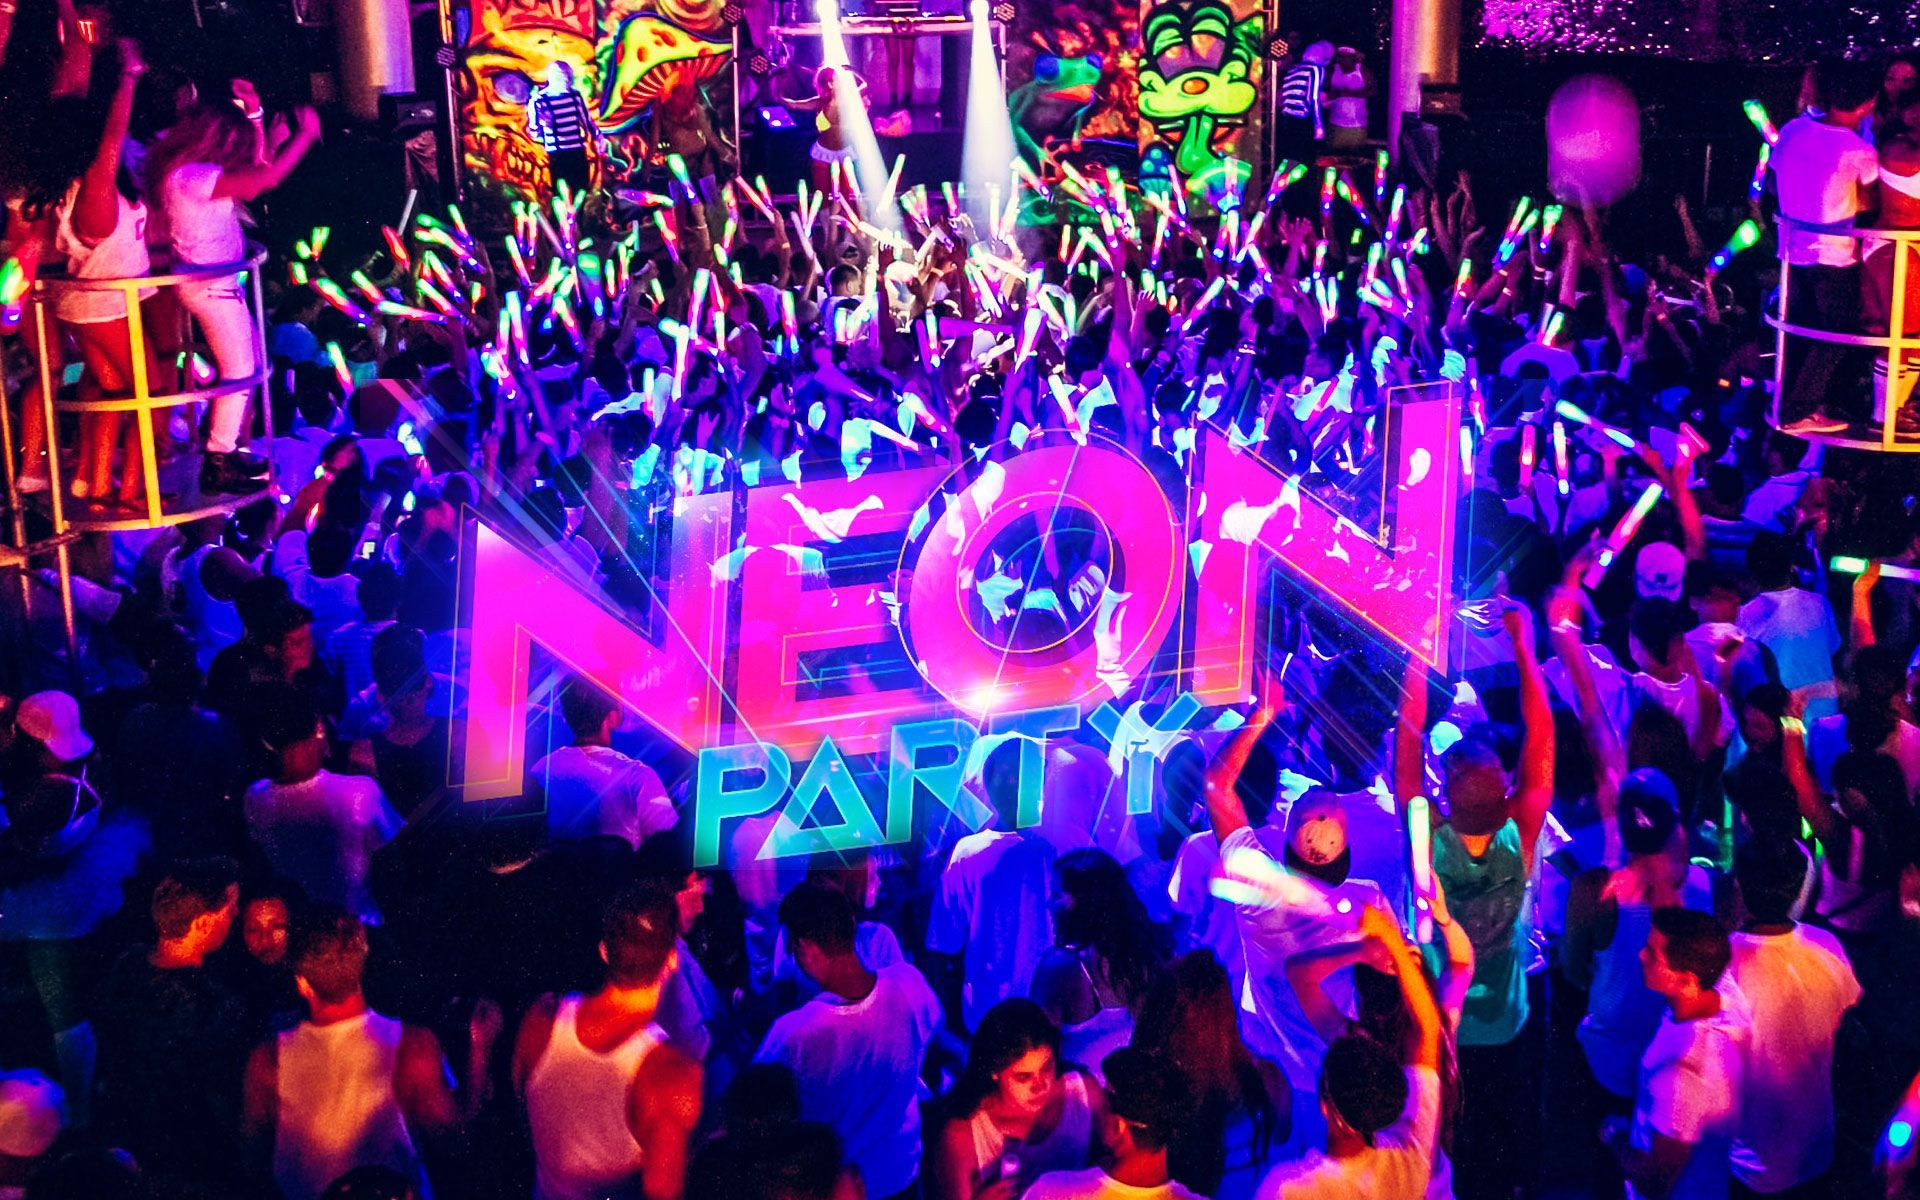 NEON PARTY